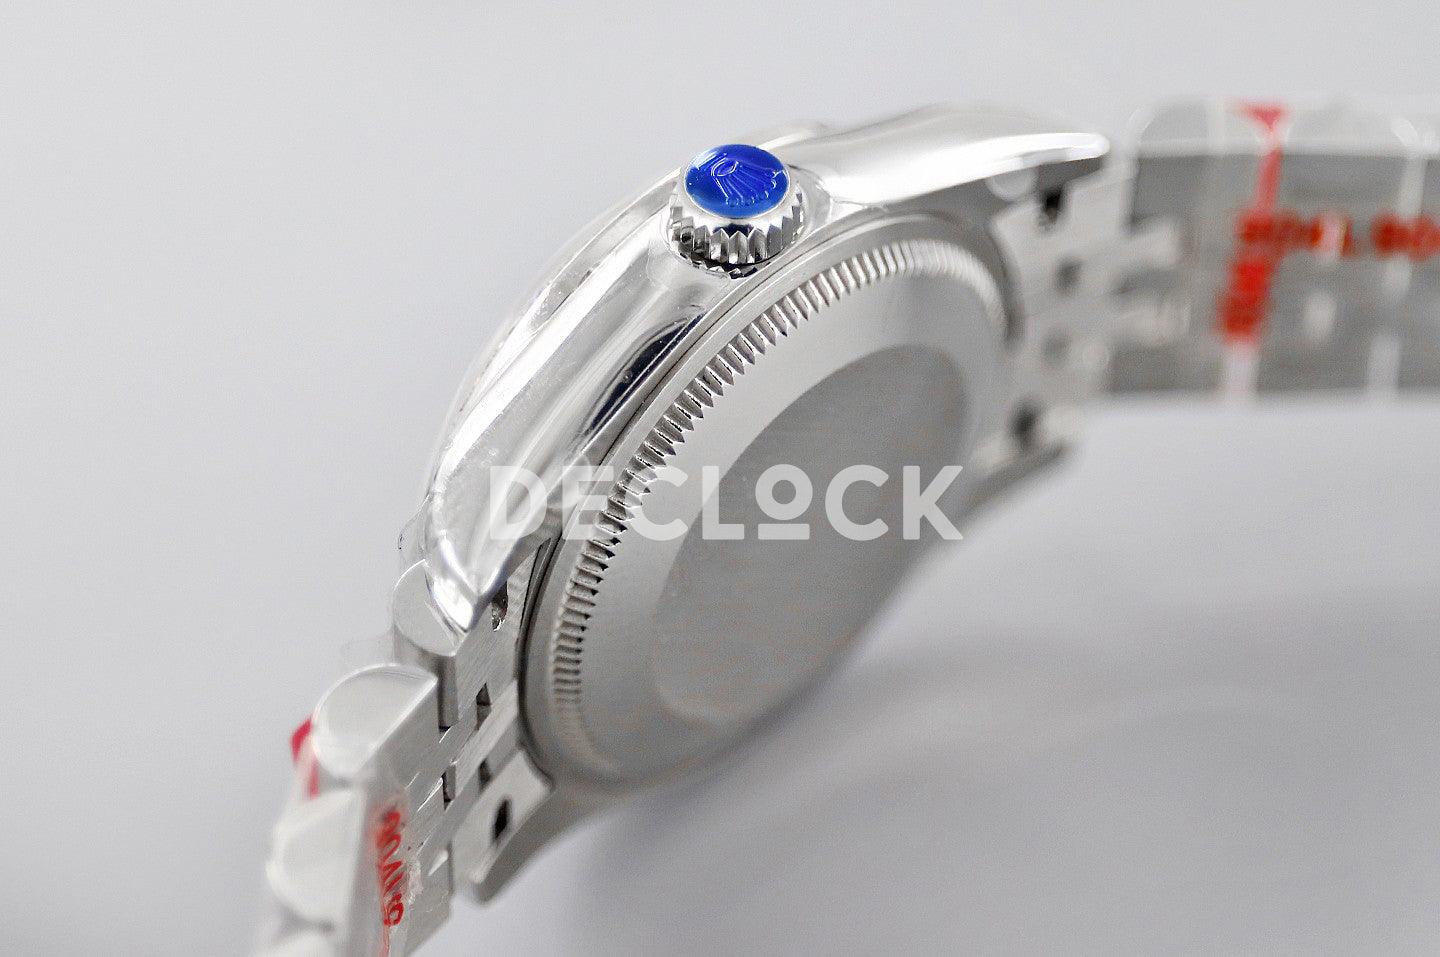 Replica Rolex Ladies Datejust 31 278384 White Dial in White Gold with Diamond Markers - Replica Watches